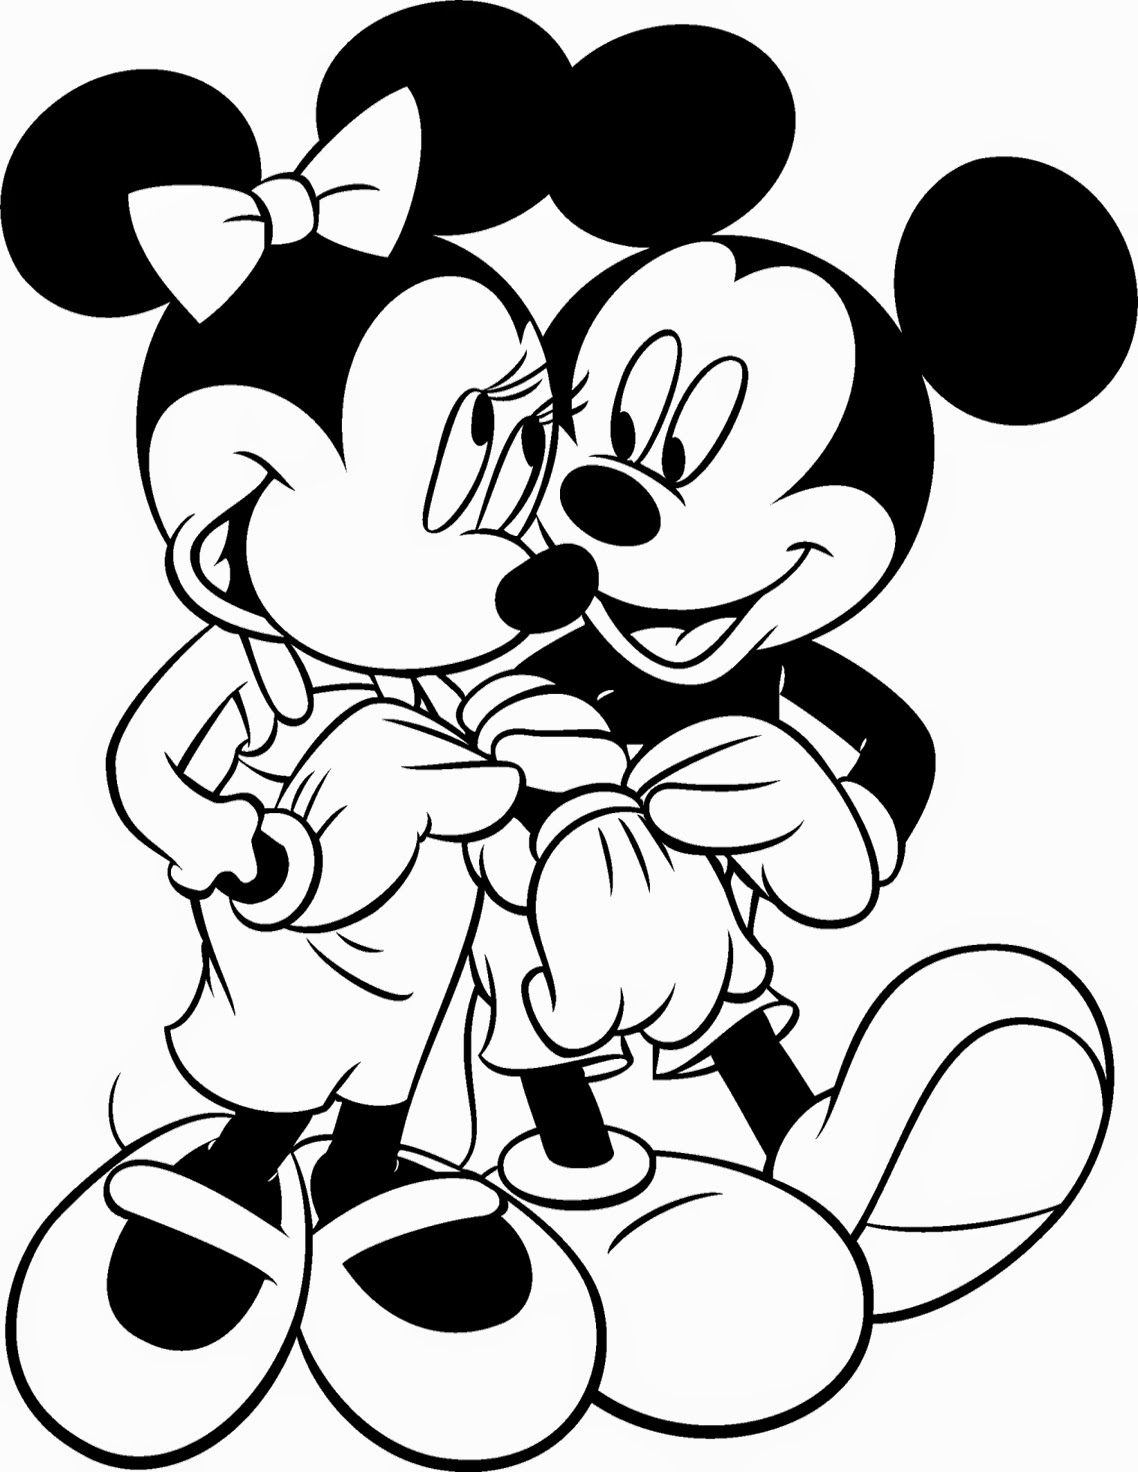 Coloring Pages: Minnie Mouse Coloring Pages Free And Printable concernant Coloriage Minnie À Imprimer